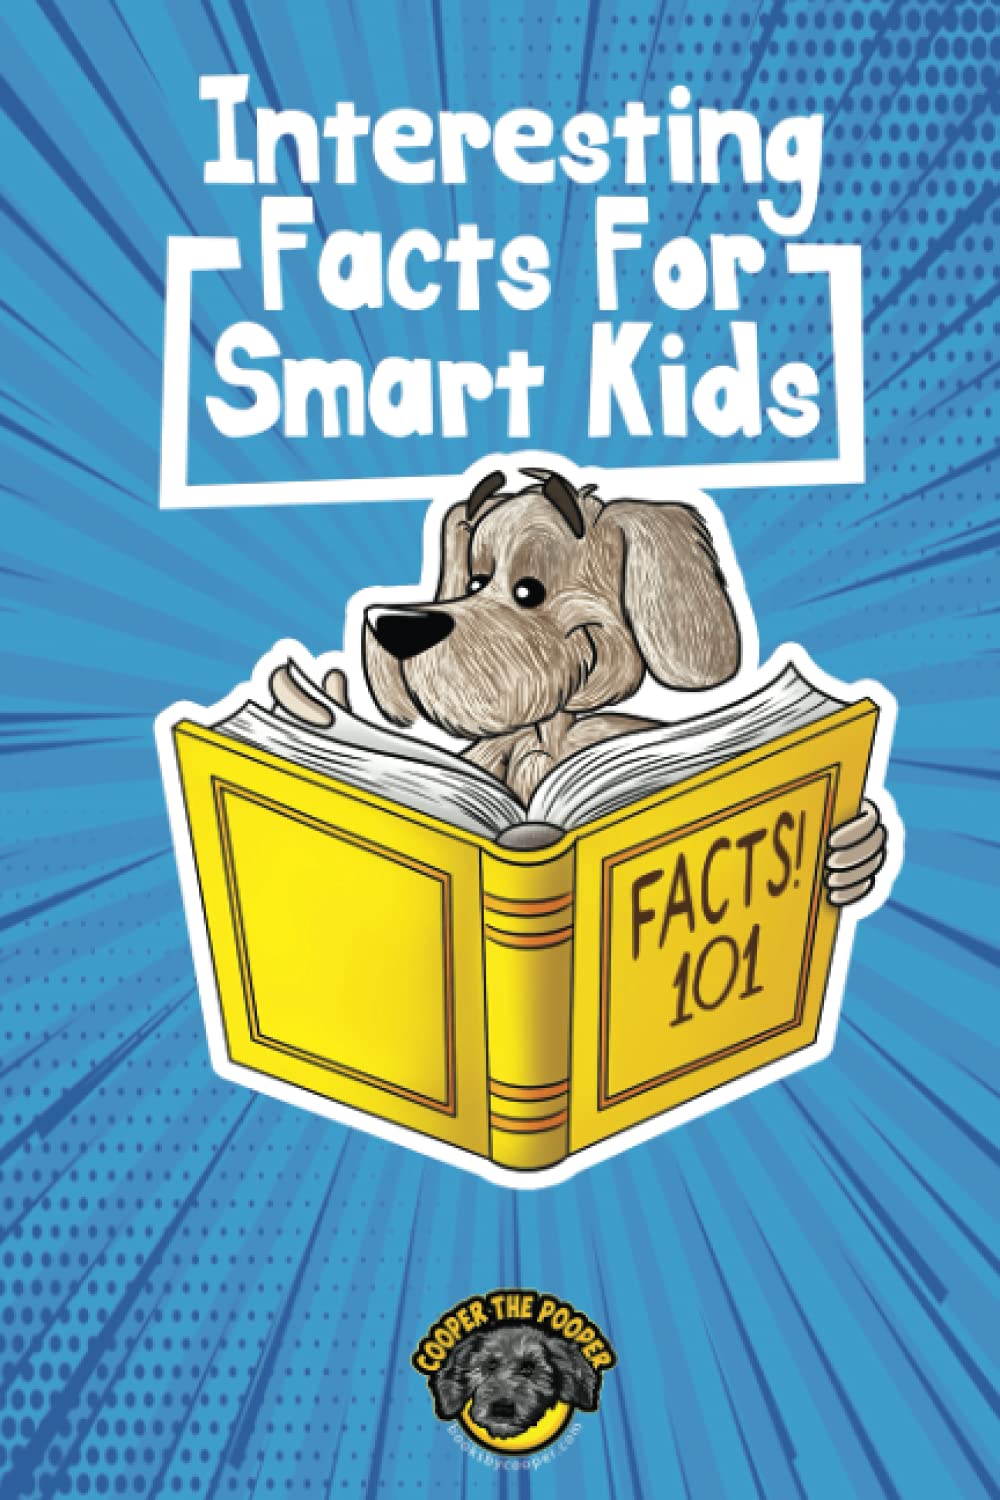 Interesting Facts for Smart Kids: 1,000+ Fun Facts for Curious Kids and Their Families (Books for Smart Kids)